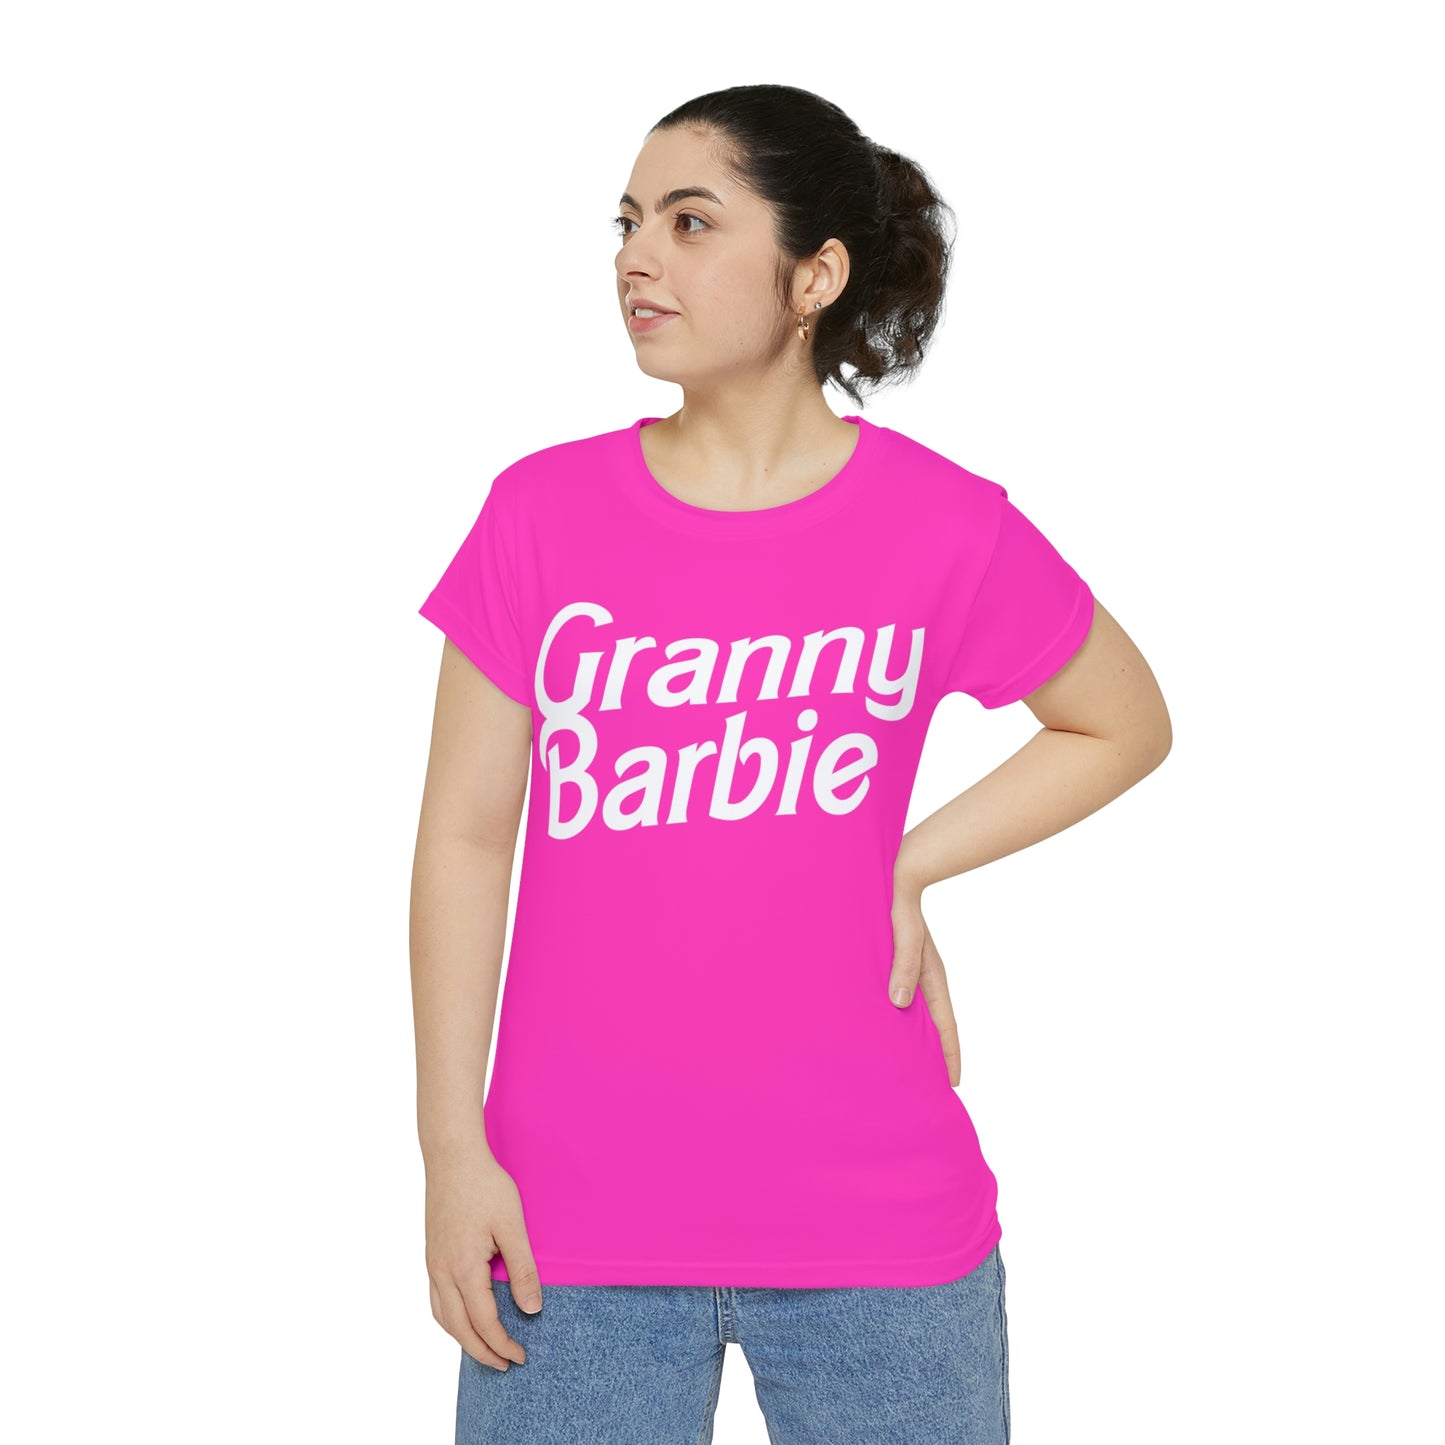 Granny Barbie, Bachelorette Party Shirts, Bridesmaid Gifts, Here comes the Party Tees, Group Party Favor Shirts, Bridal Party Shirt for women